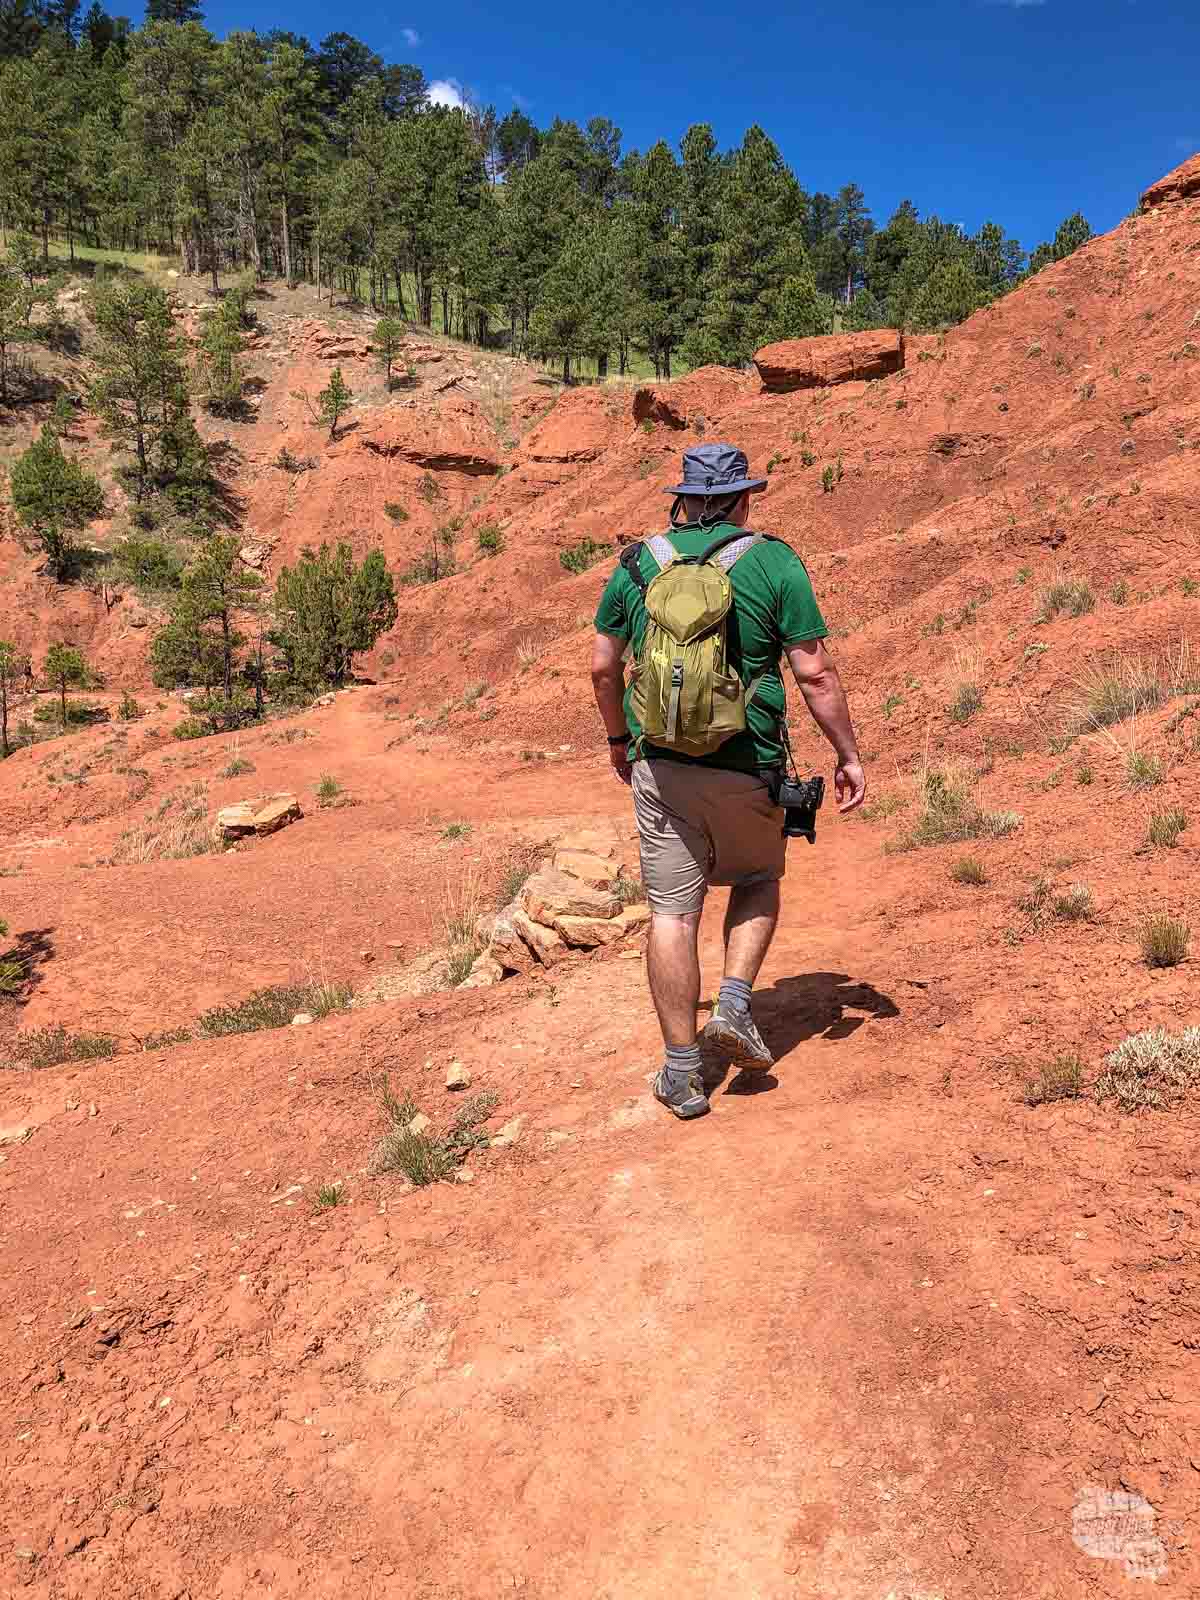 Grant Sinclair hiking the Red Beds Trail, with large amounts of red dirt surrounding him.